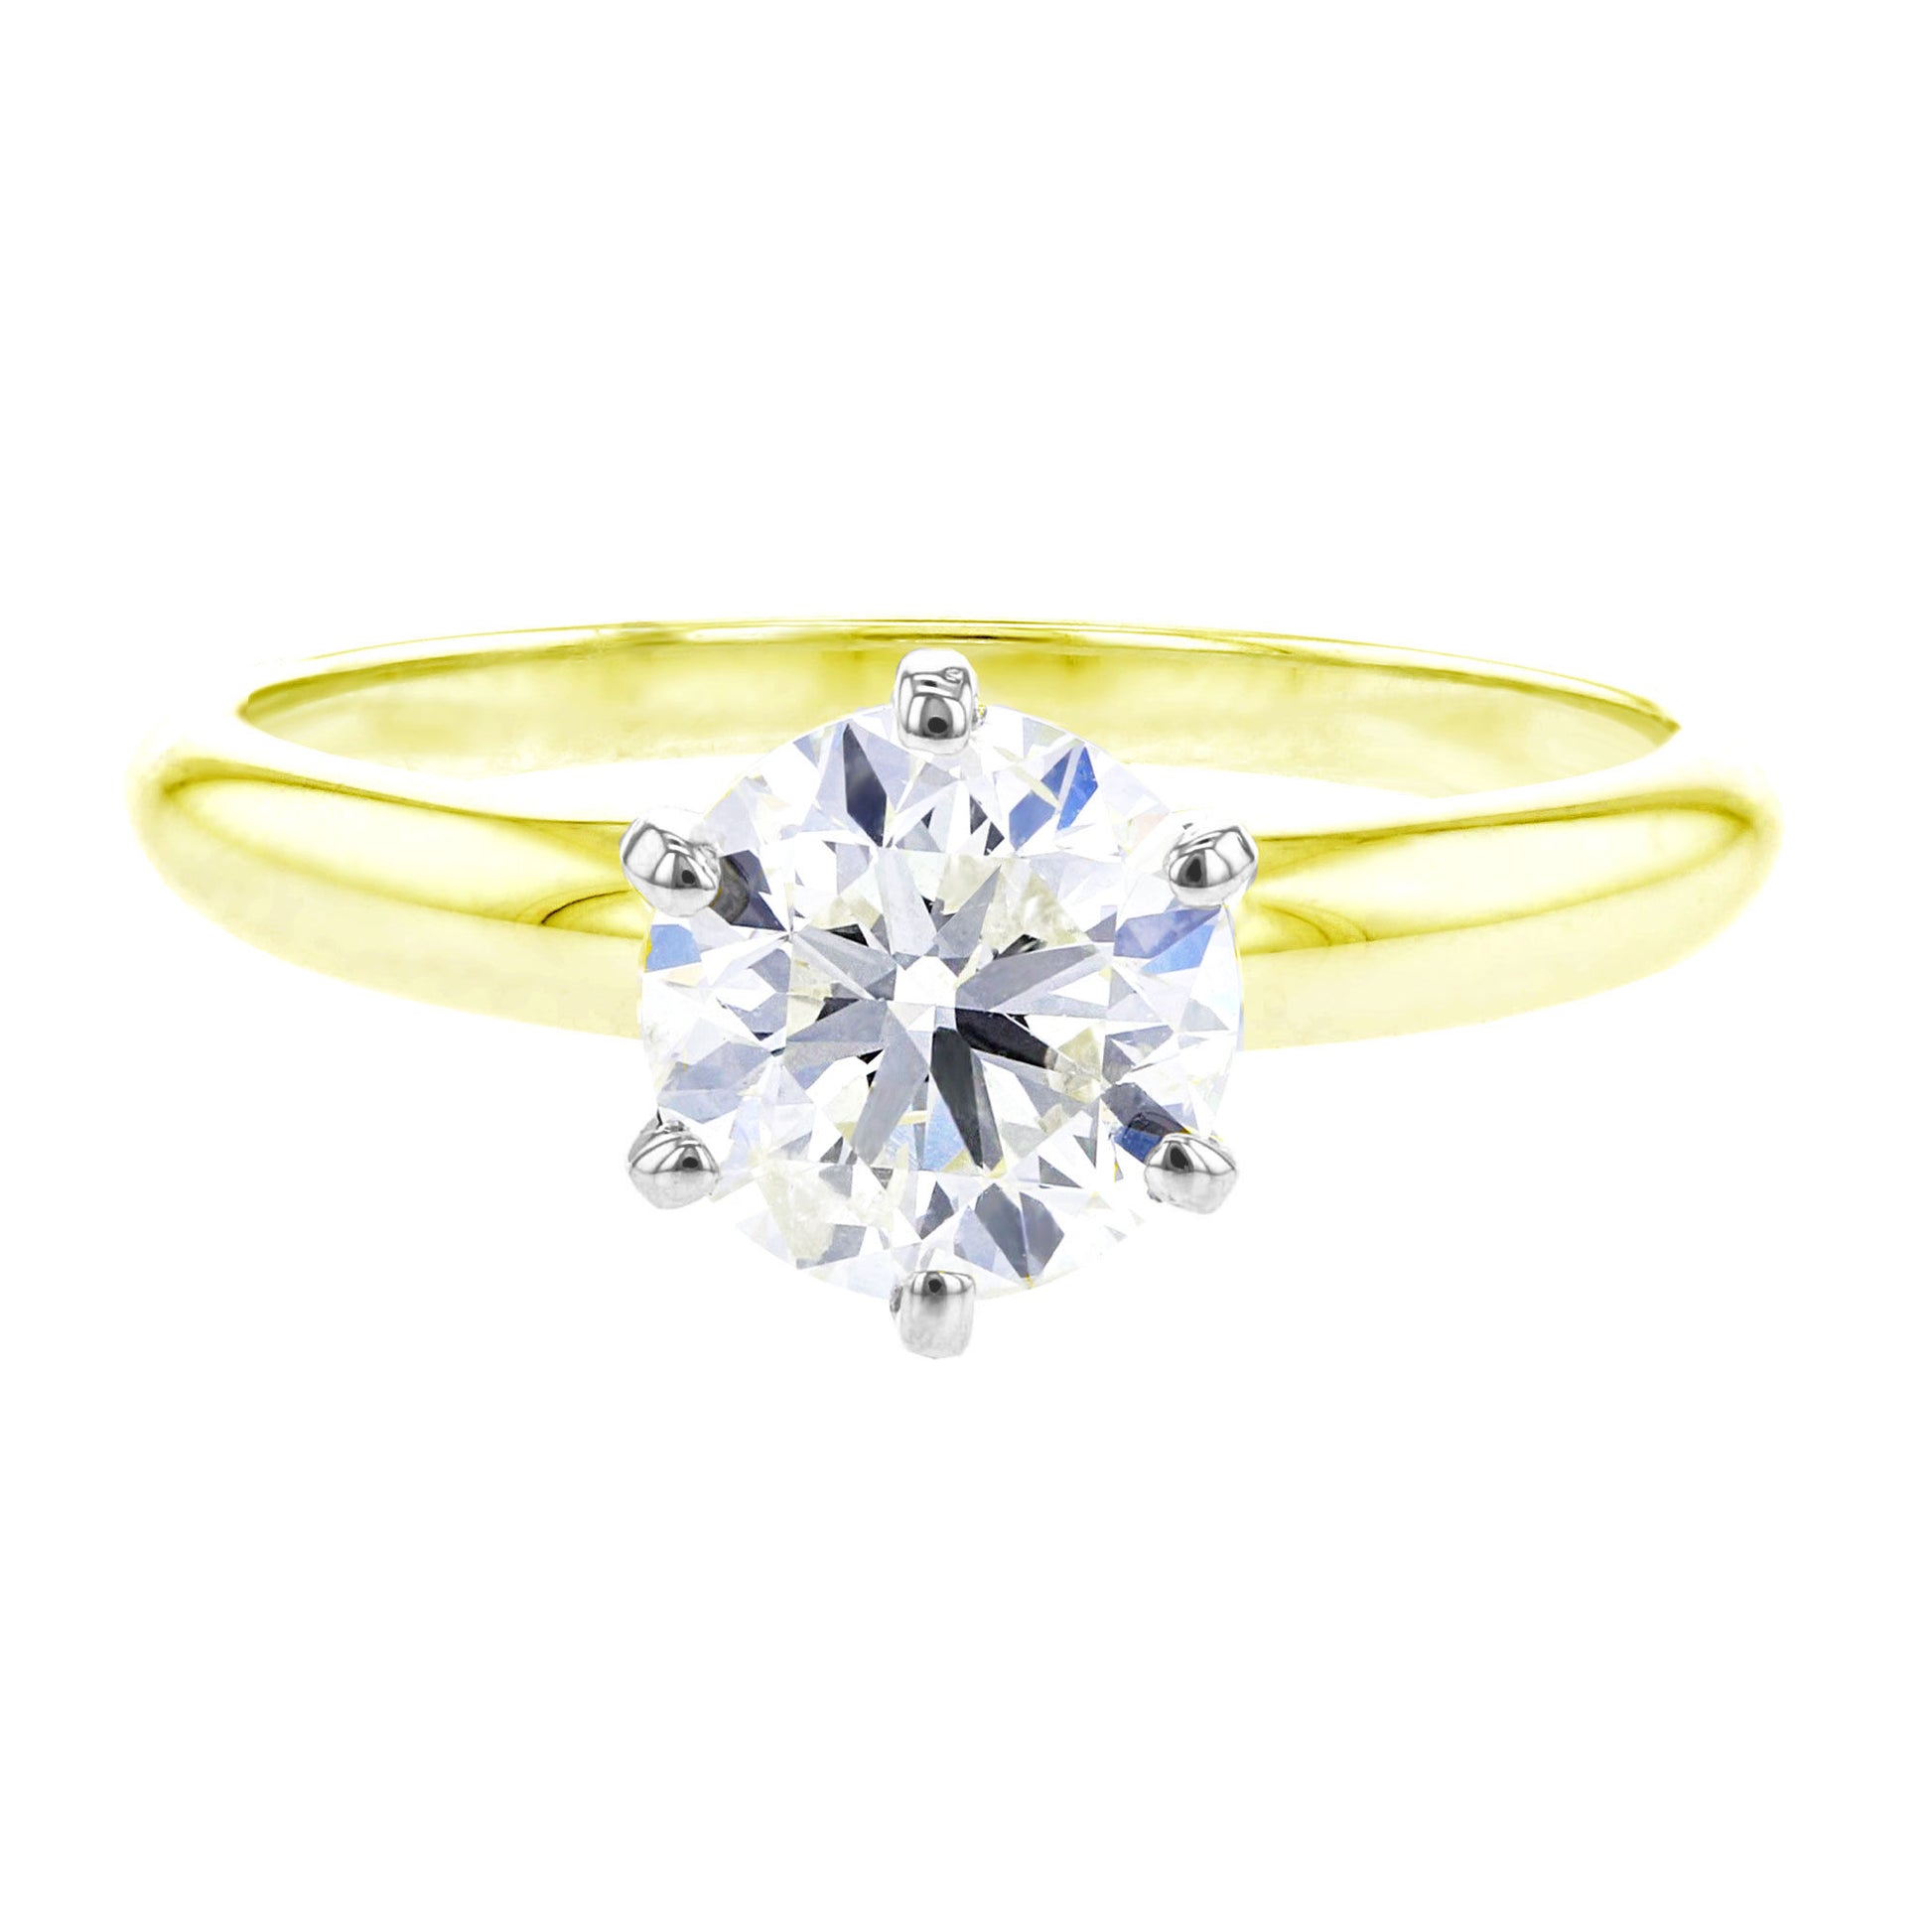 Christa Ready For Love Diamond Engagement Ring 1 1/4CT